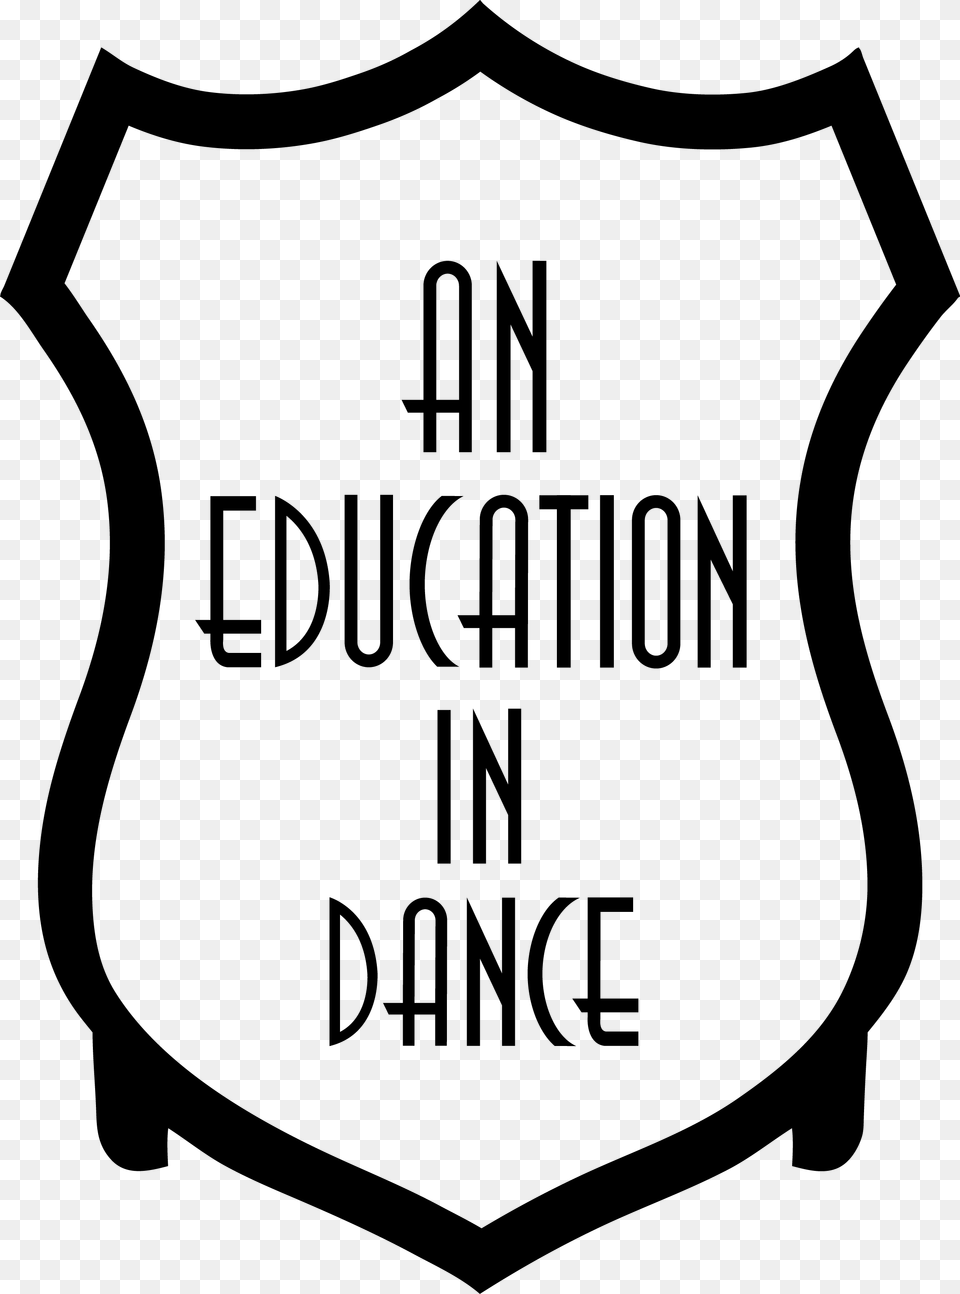 Bomber Jacket An Education In Dance, Armor, Logo, Shield, Ammunition Png Image